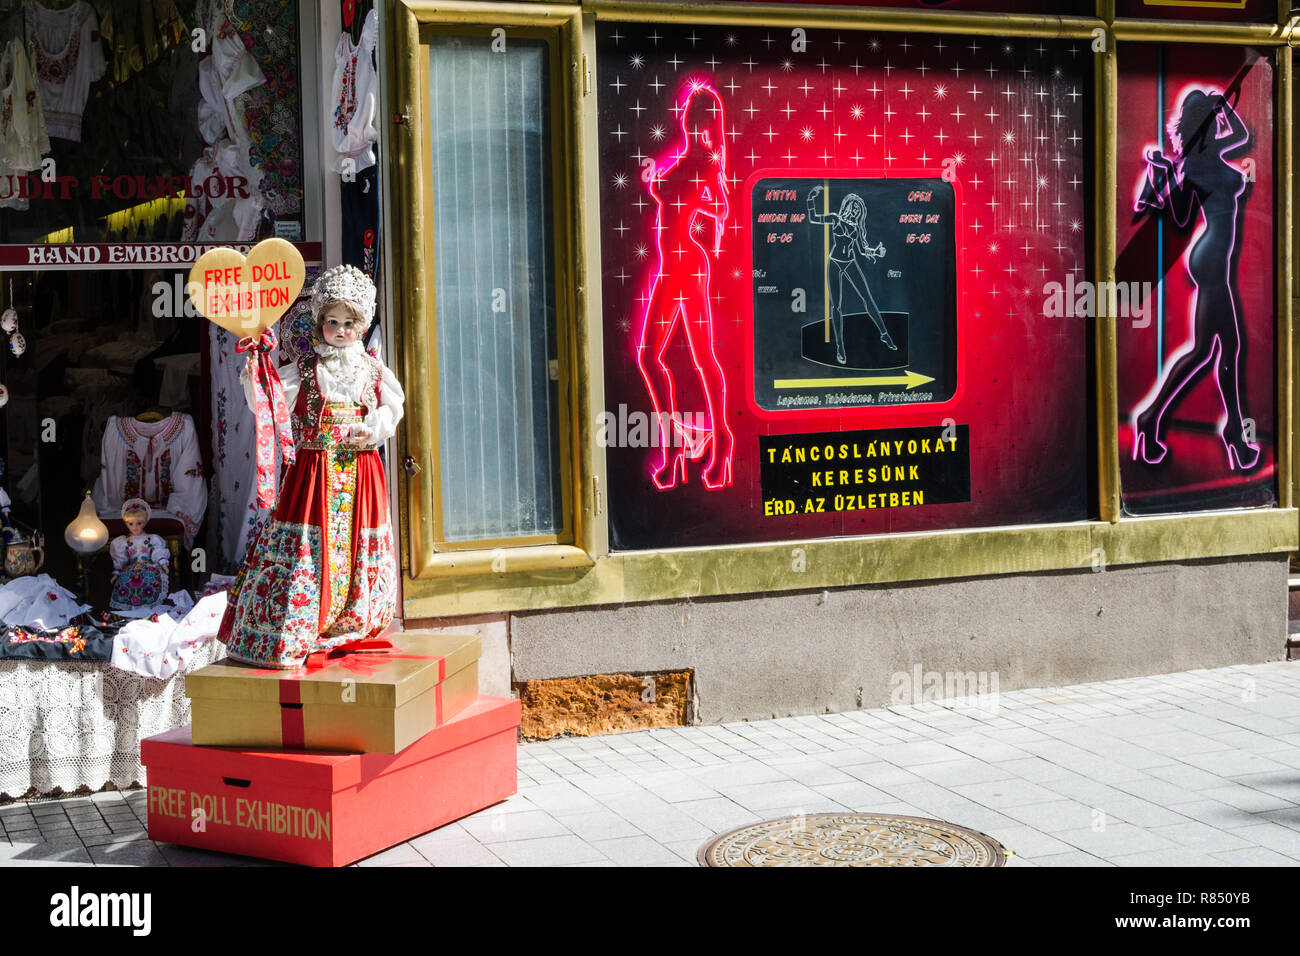 Doll girl in traditional European clothing in front of a dolls shop and next to a strip club, Budapest, Hungary Stock Photo